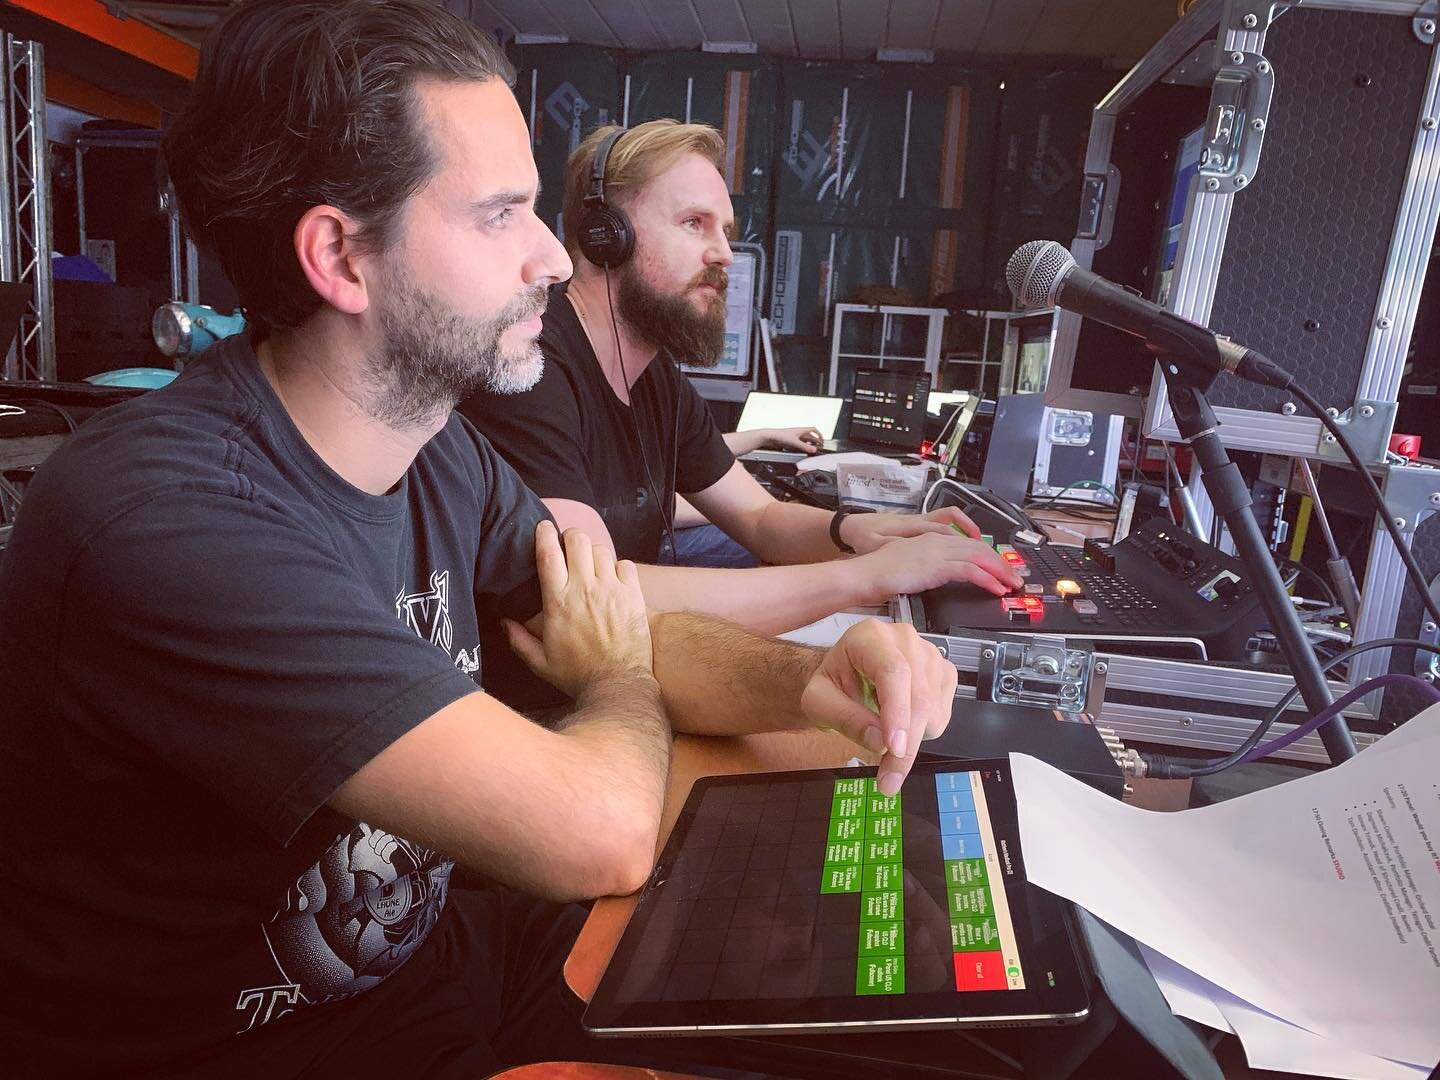 The Renegade / Little Ginger team out in force providing live production and streaming services for a series of virtual corporate events during lockdown when live audiences were not an option.  #livestreaming #virtualevents #multicam #eventplanner #l